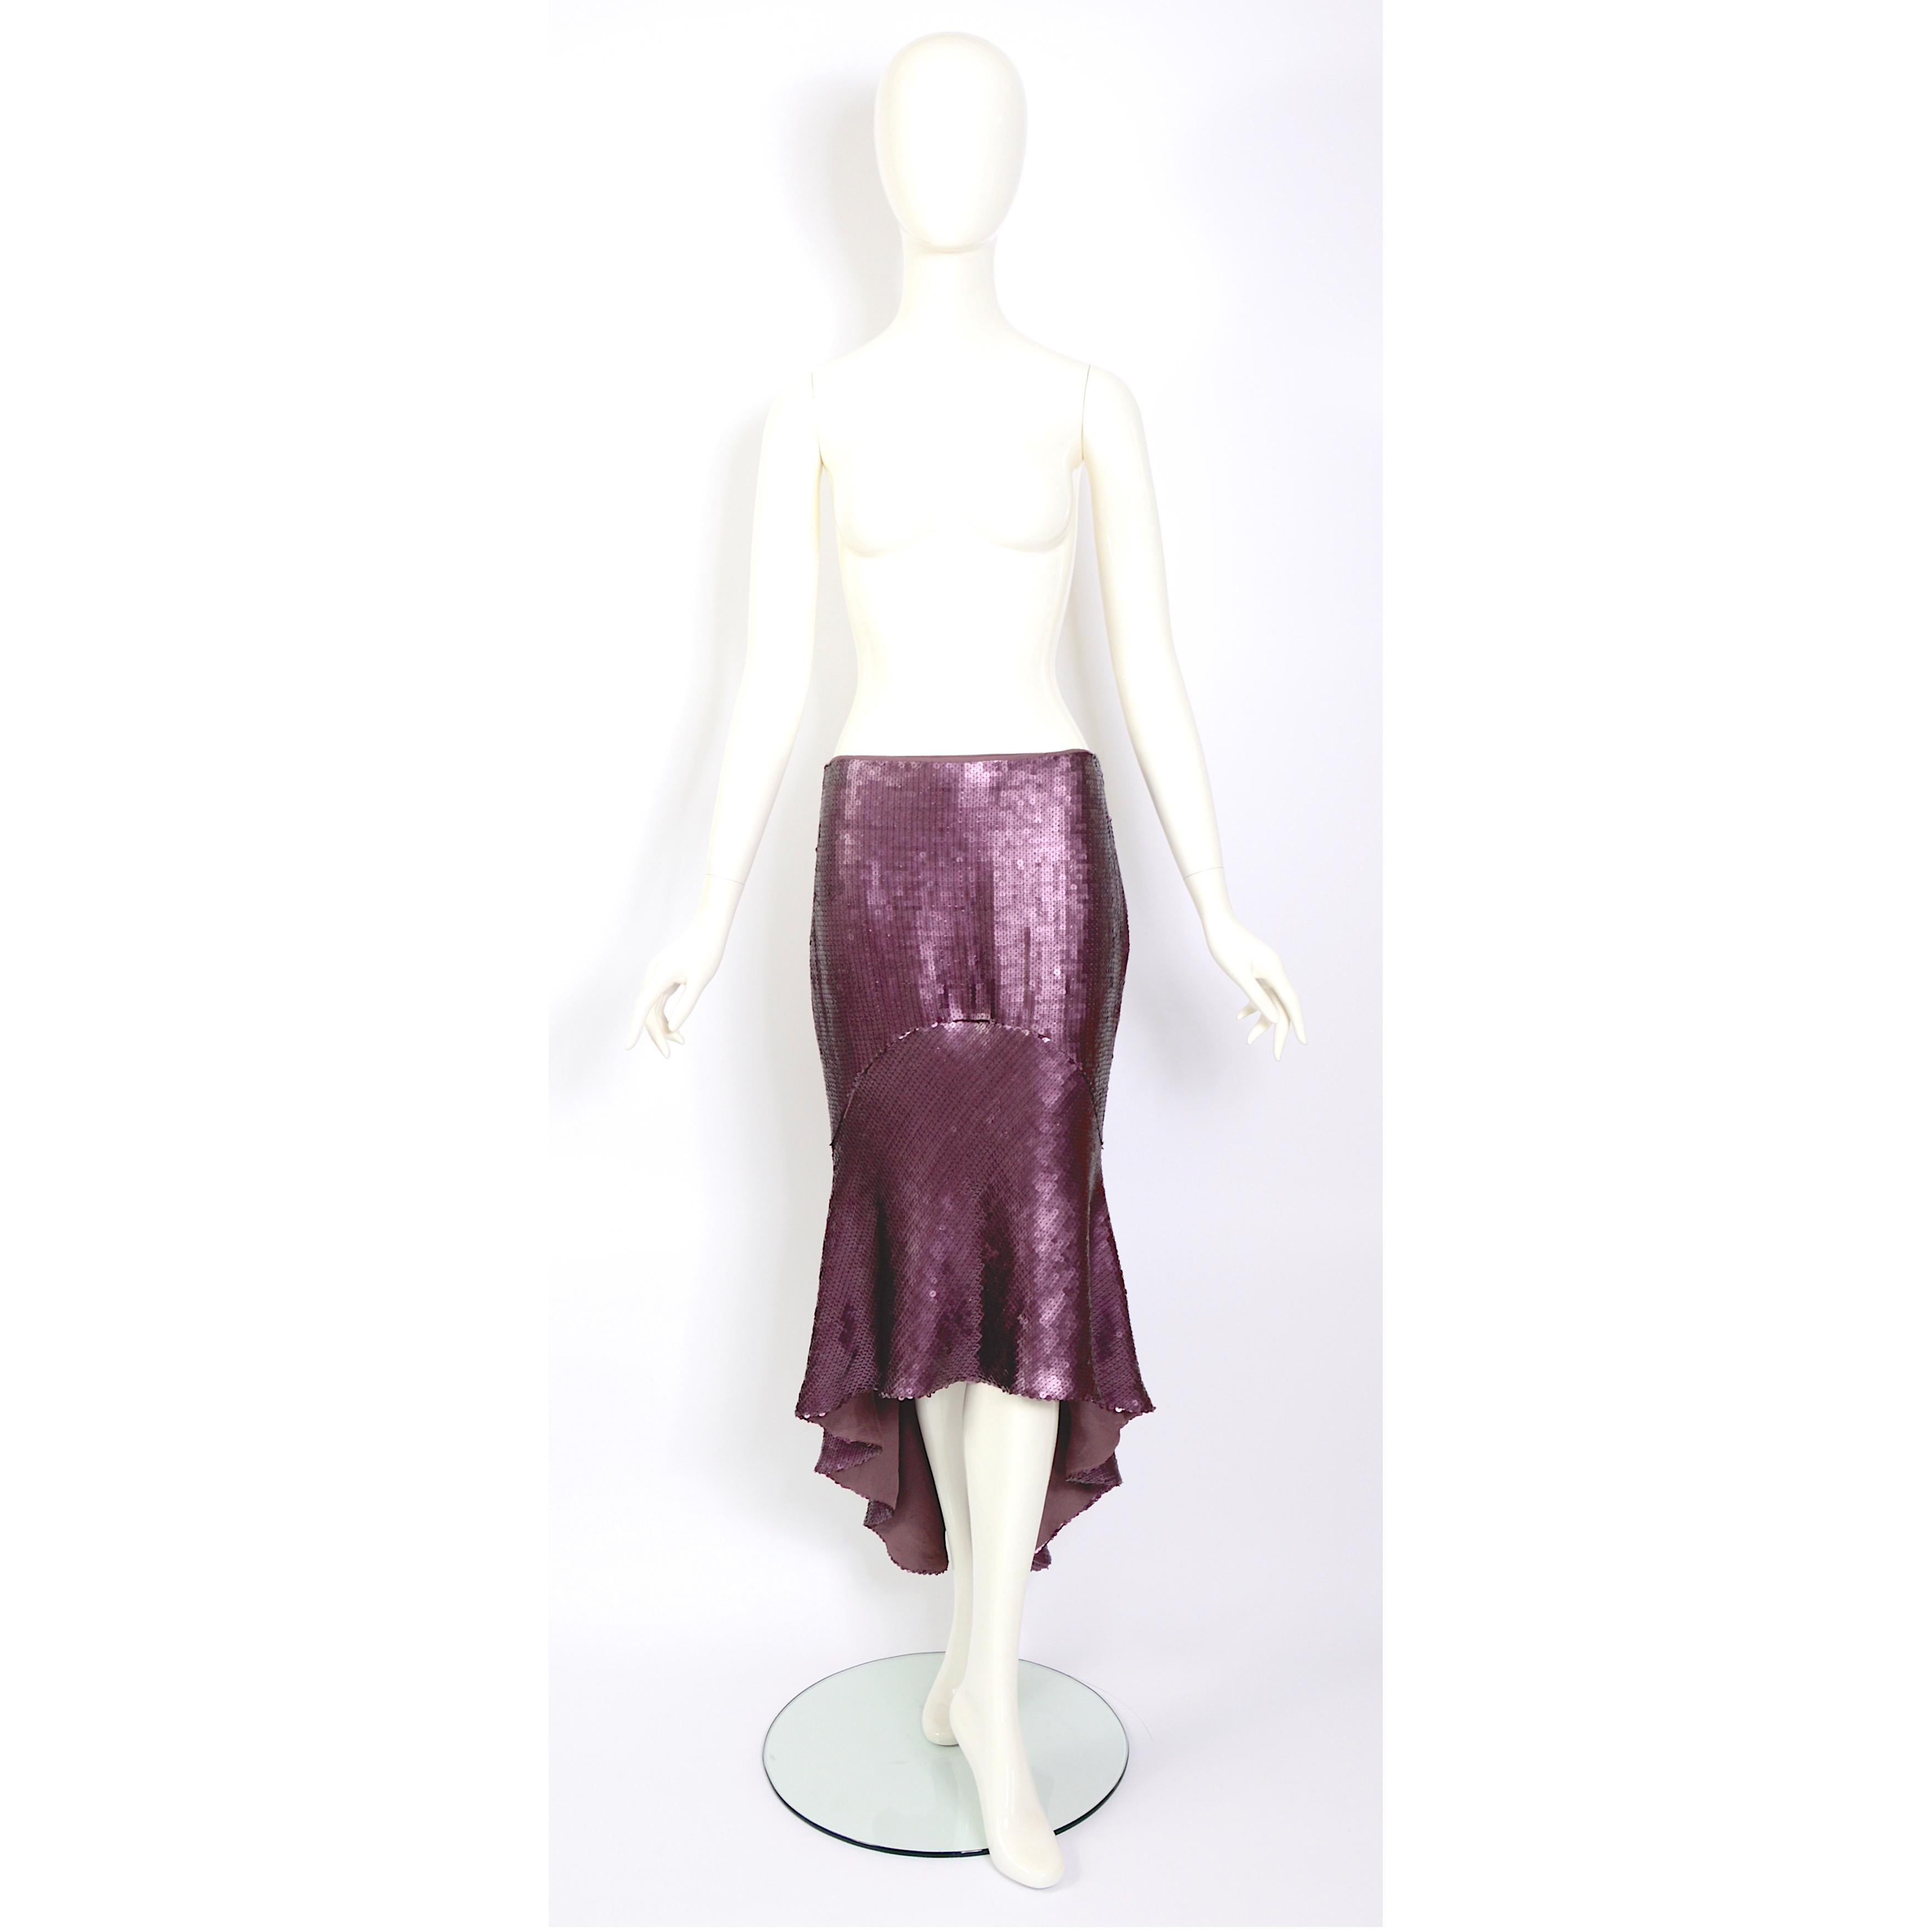 Chloé by Stella McCartney runway 1999 vintage sequin fishtail style skirt  In Excellent Condition For Sale In Antwerpen, Vlaams Gewest